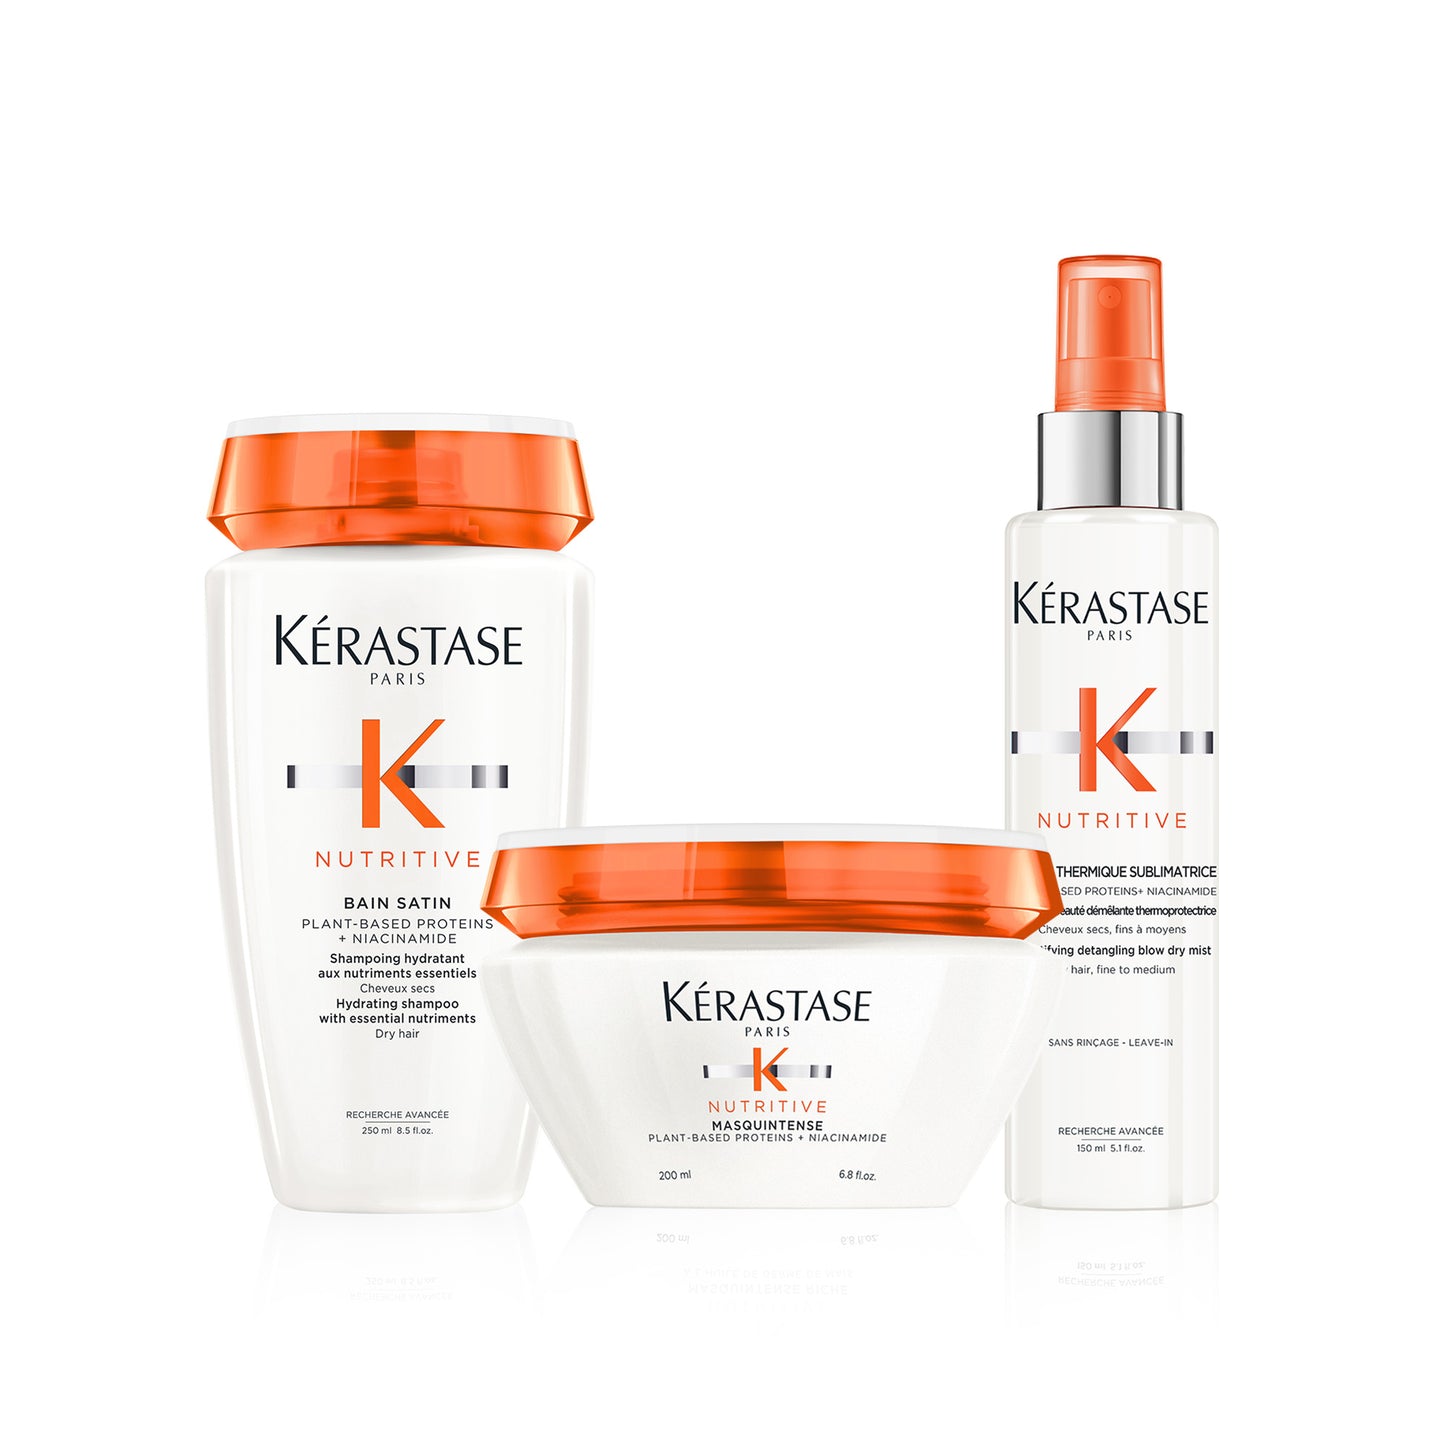 Nutritive Intense Hydration Routine for Fine to Medium Hair